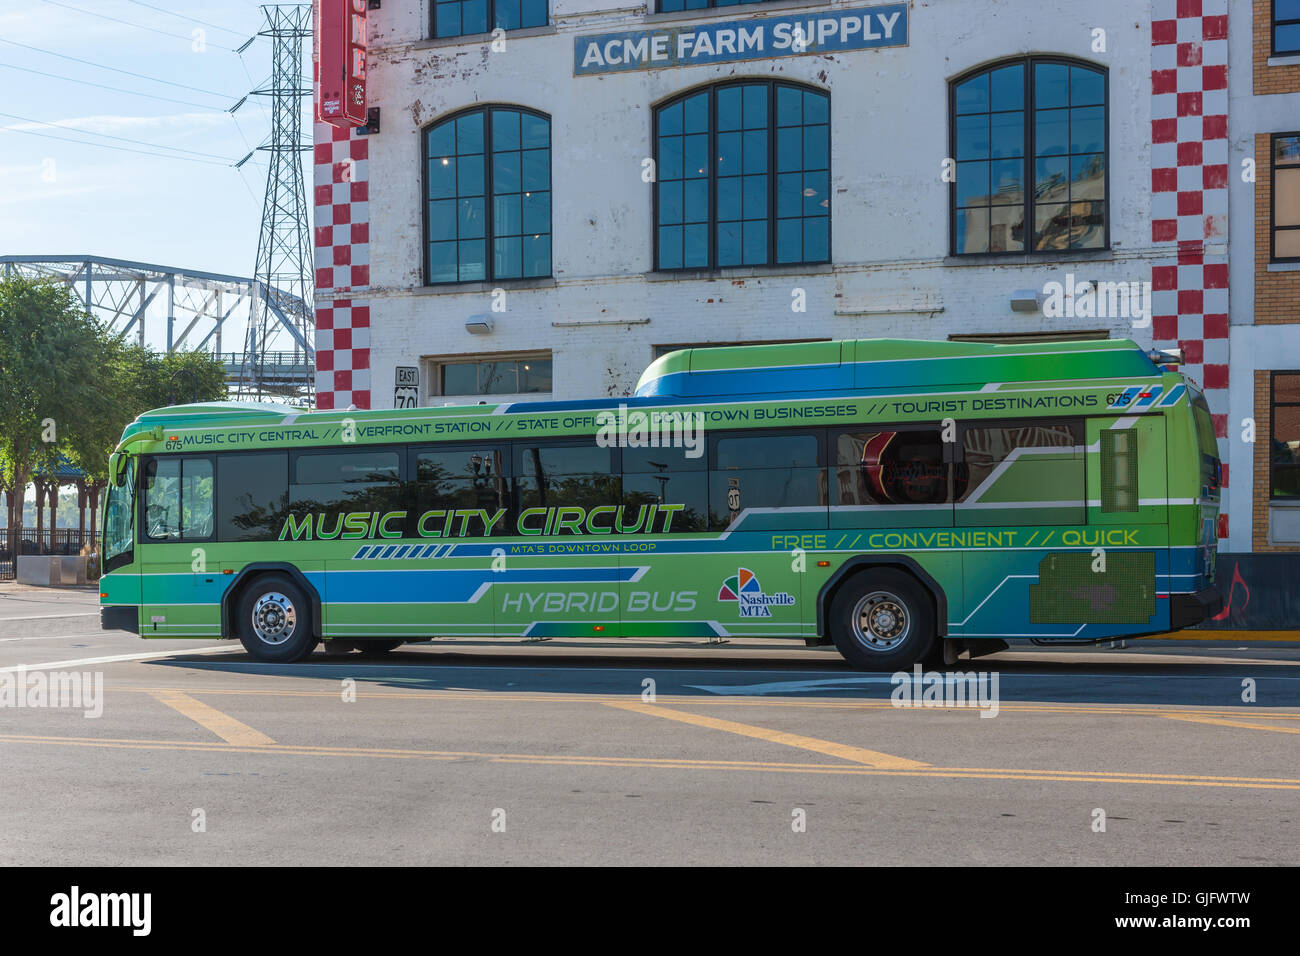 A free Music City Circuit circulator bus in the Honky Tonk District of Nashville, Tennessee. Stock Photo